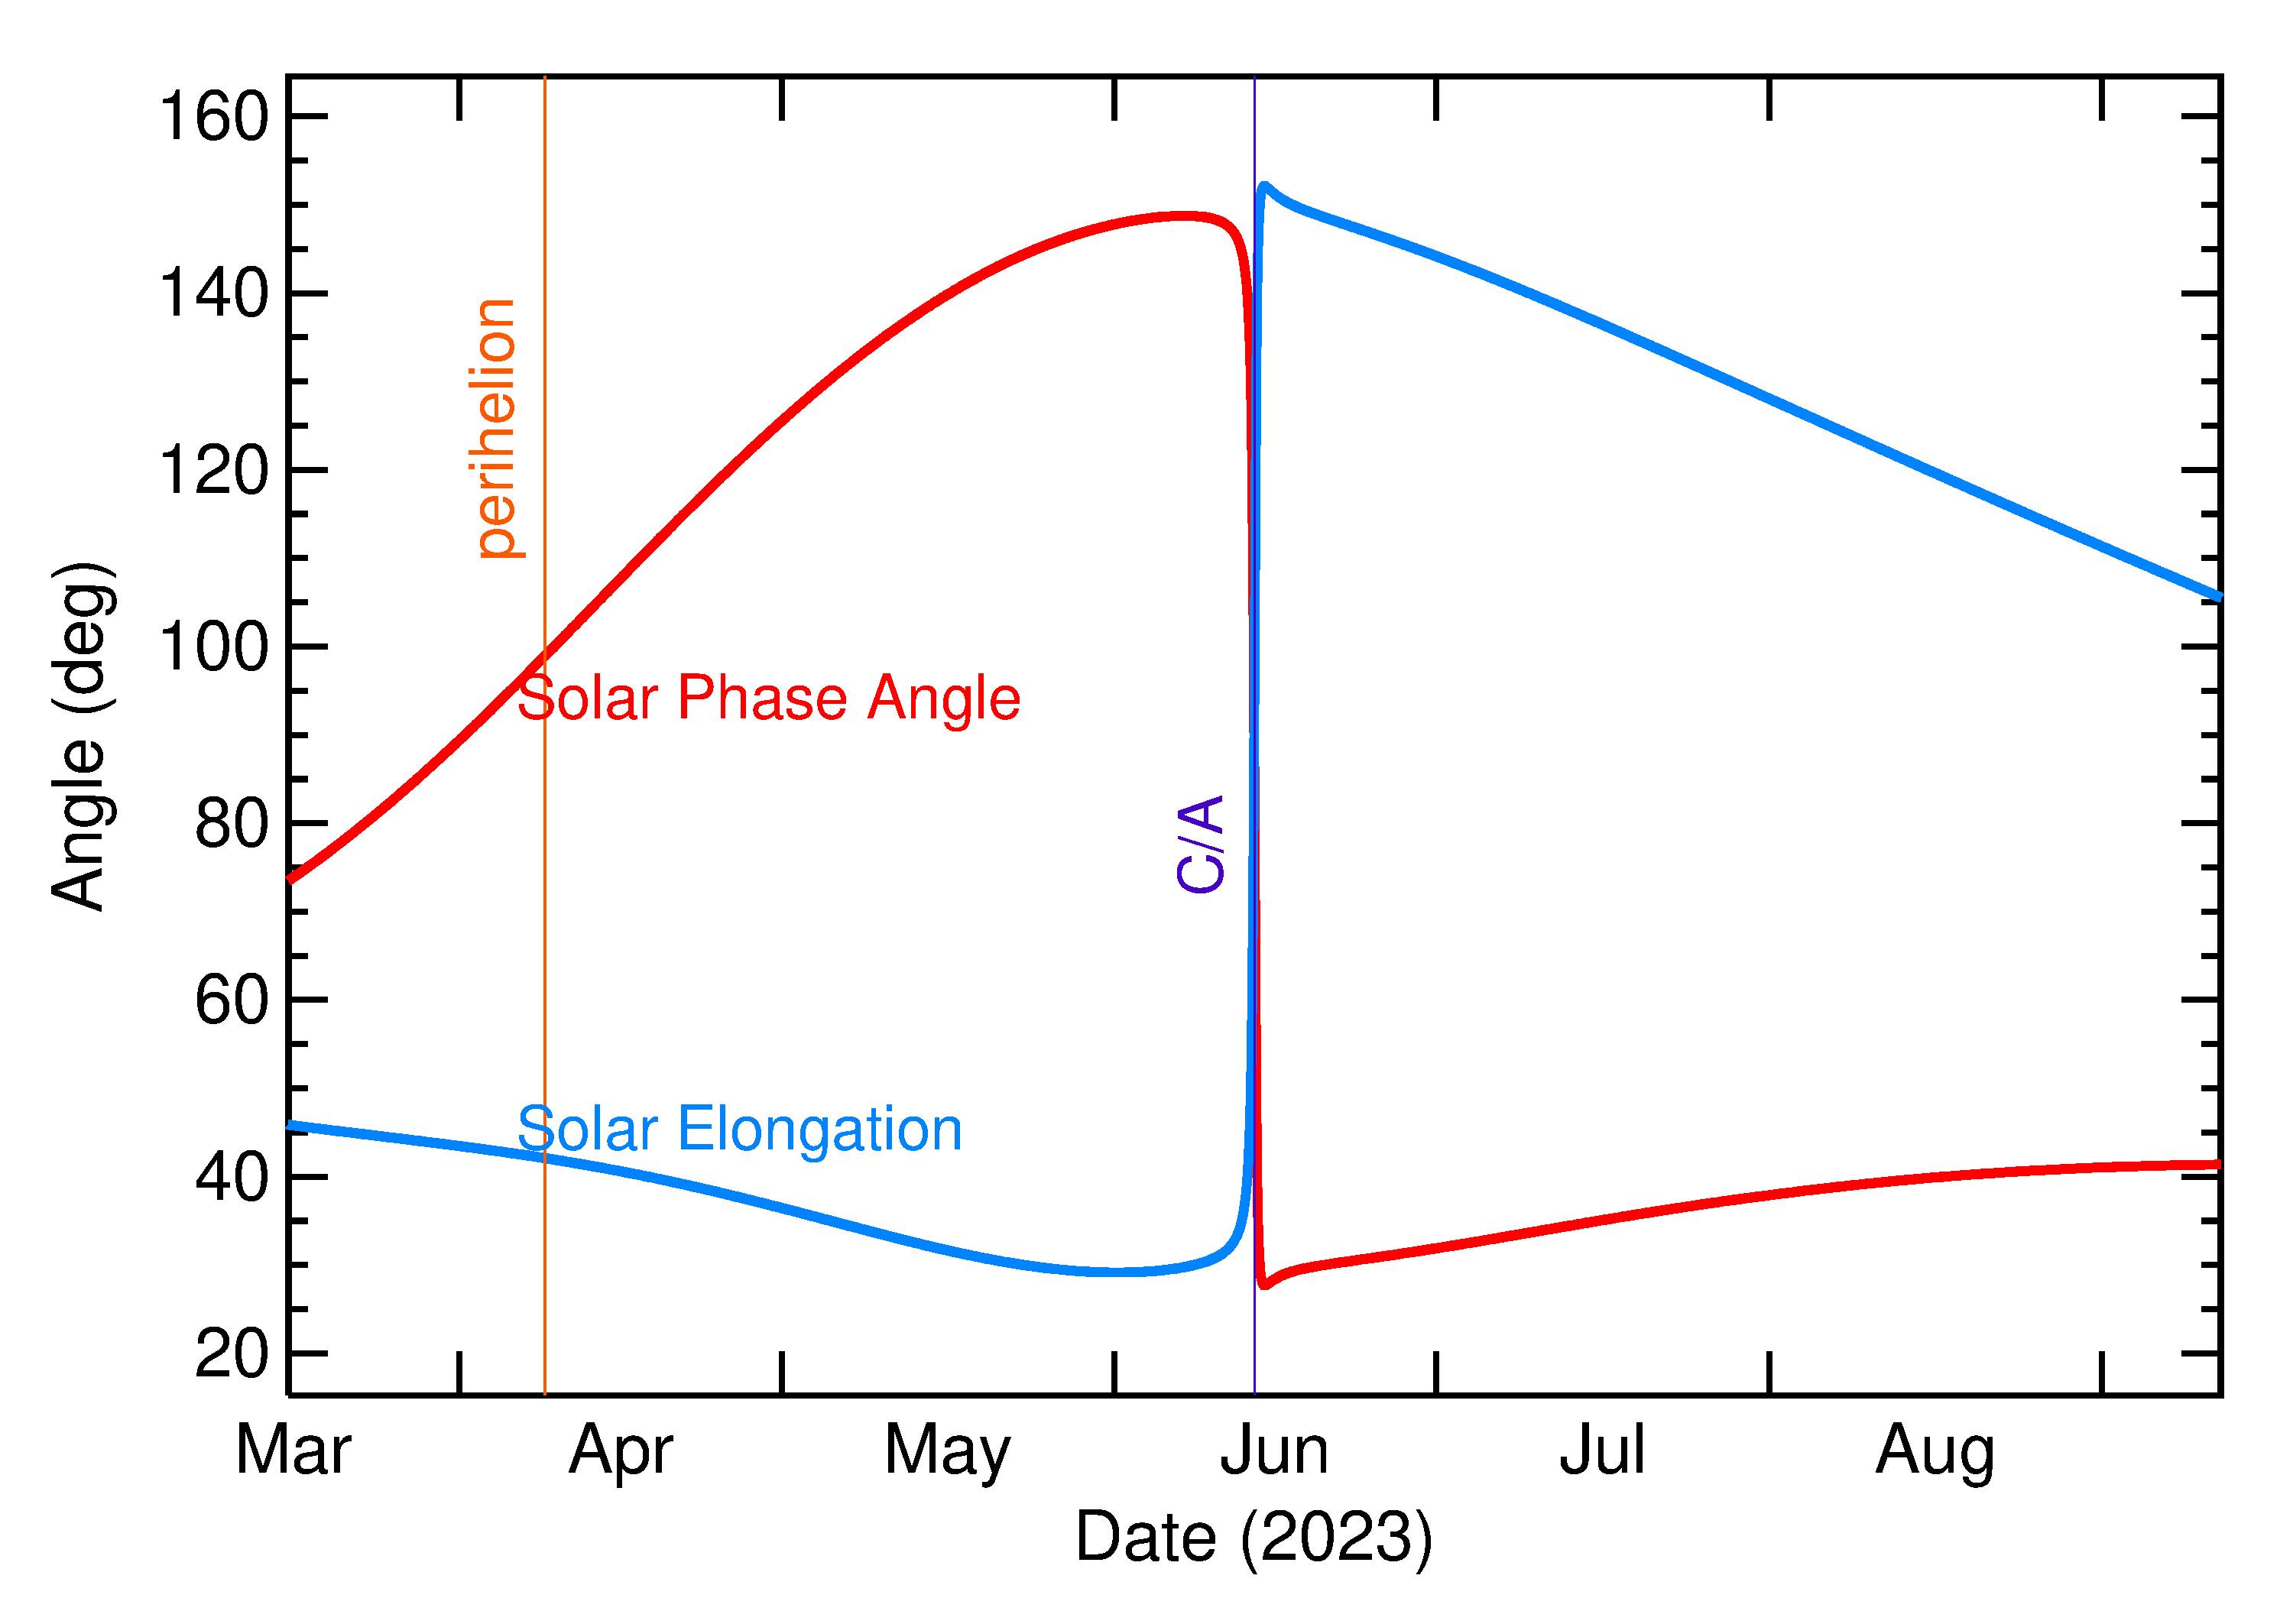 Solar Elongation and Solar Phase Angle of 2023 LP1 in the months around closest approach